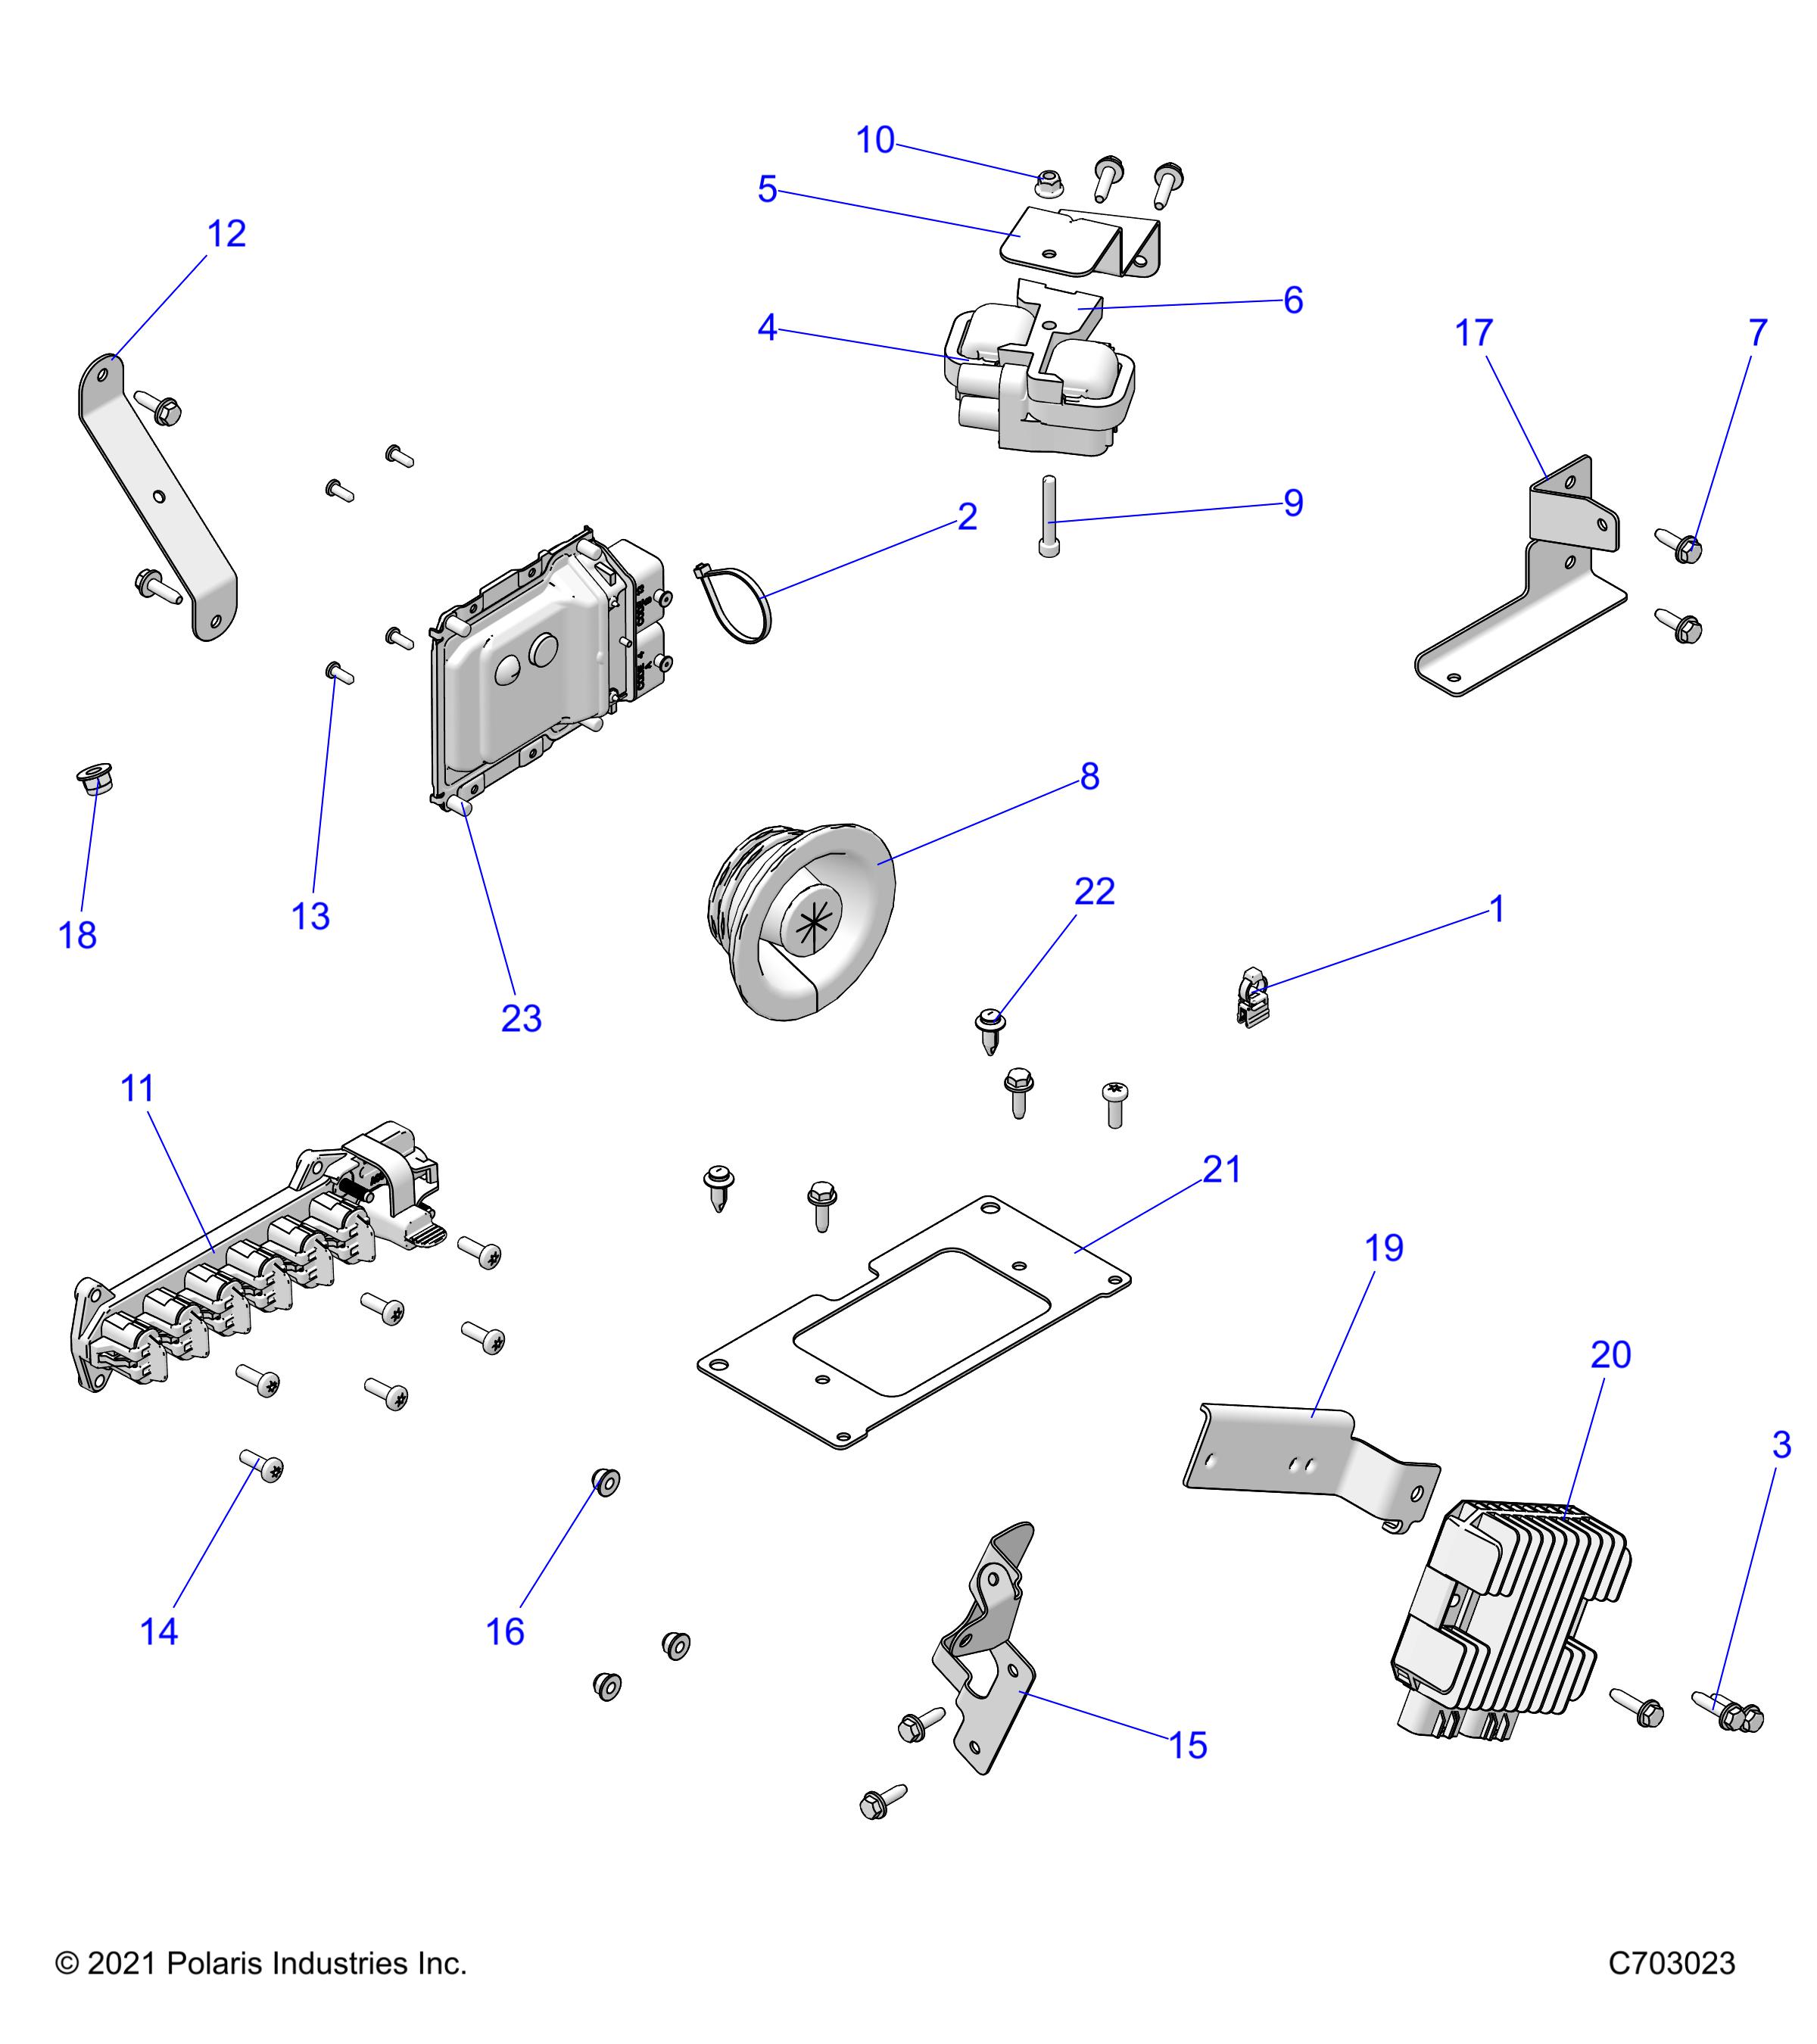 Part Number : 5264314 BRKT-HARNESS ROUTING